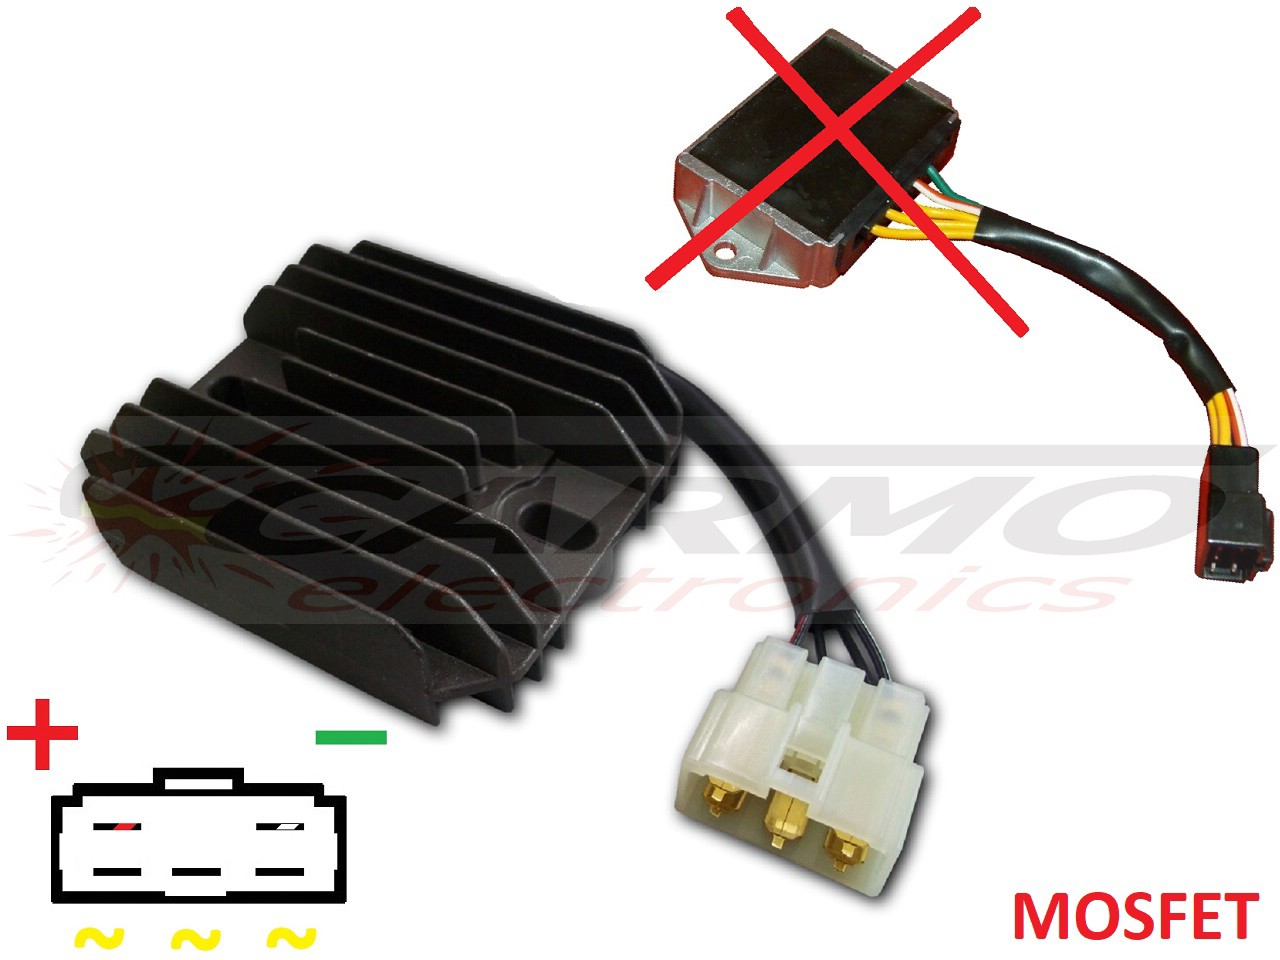 CARR201 - MOSFET Gasgas Gas Gas Voltage regulator rectifier (MFS450434009 Ducati) - Click Image to Close